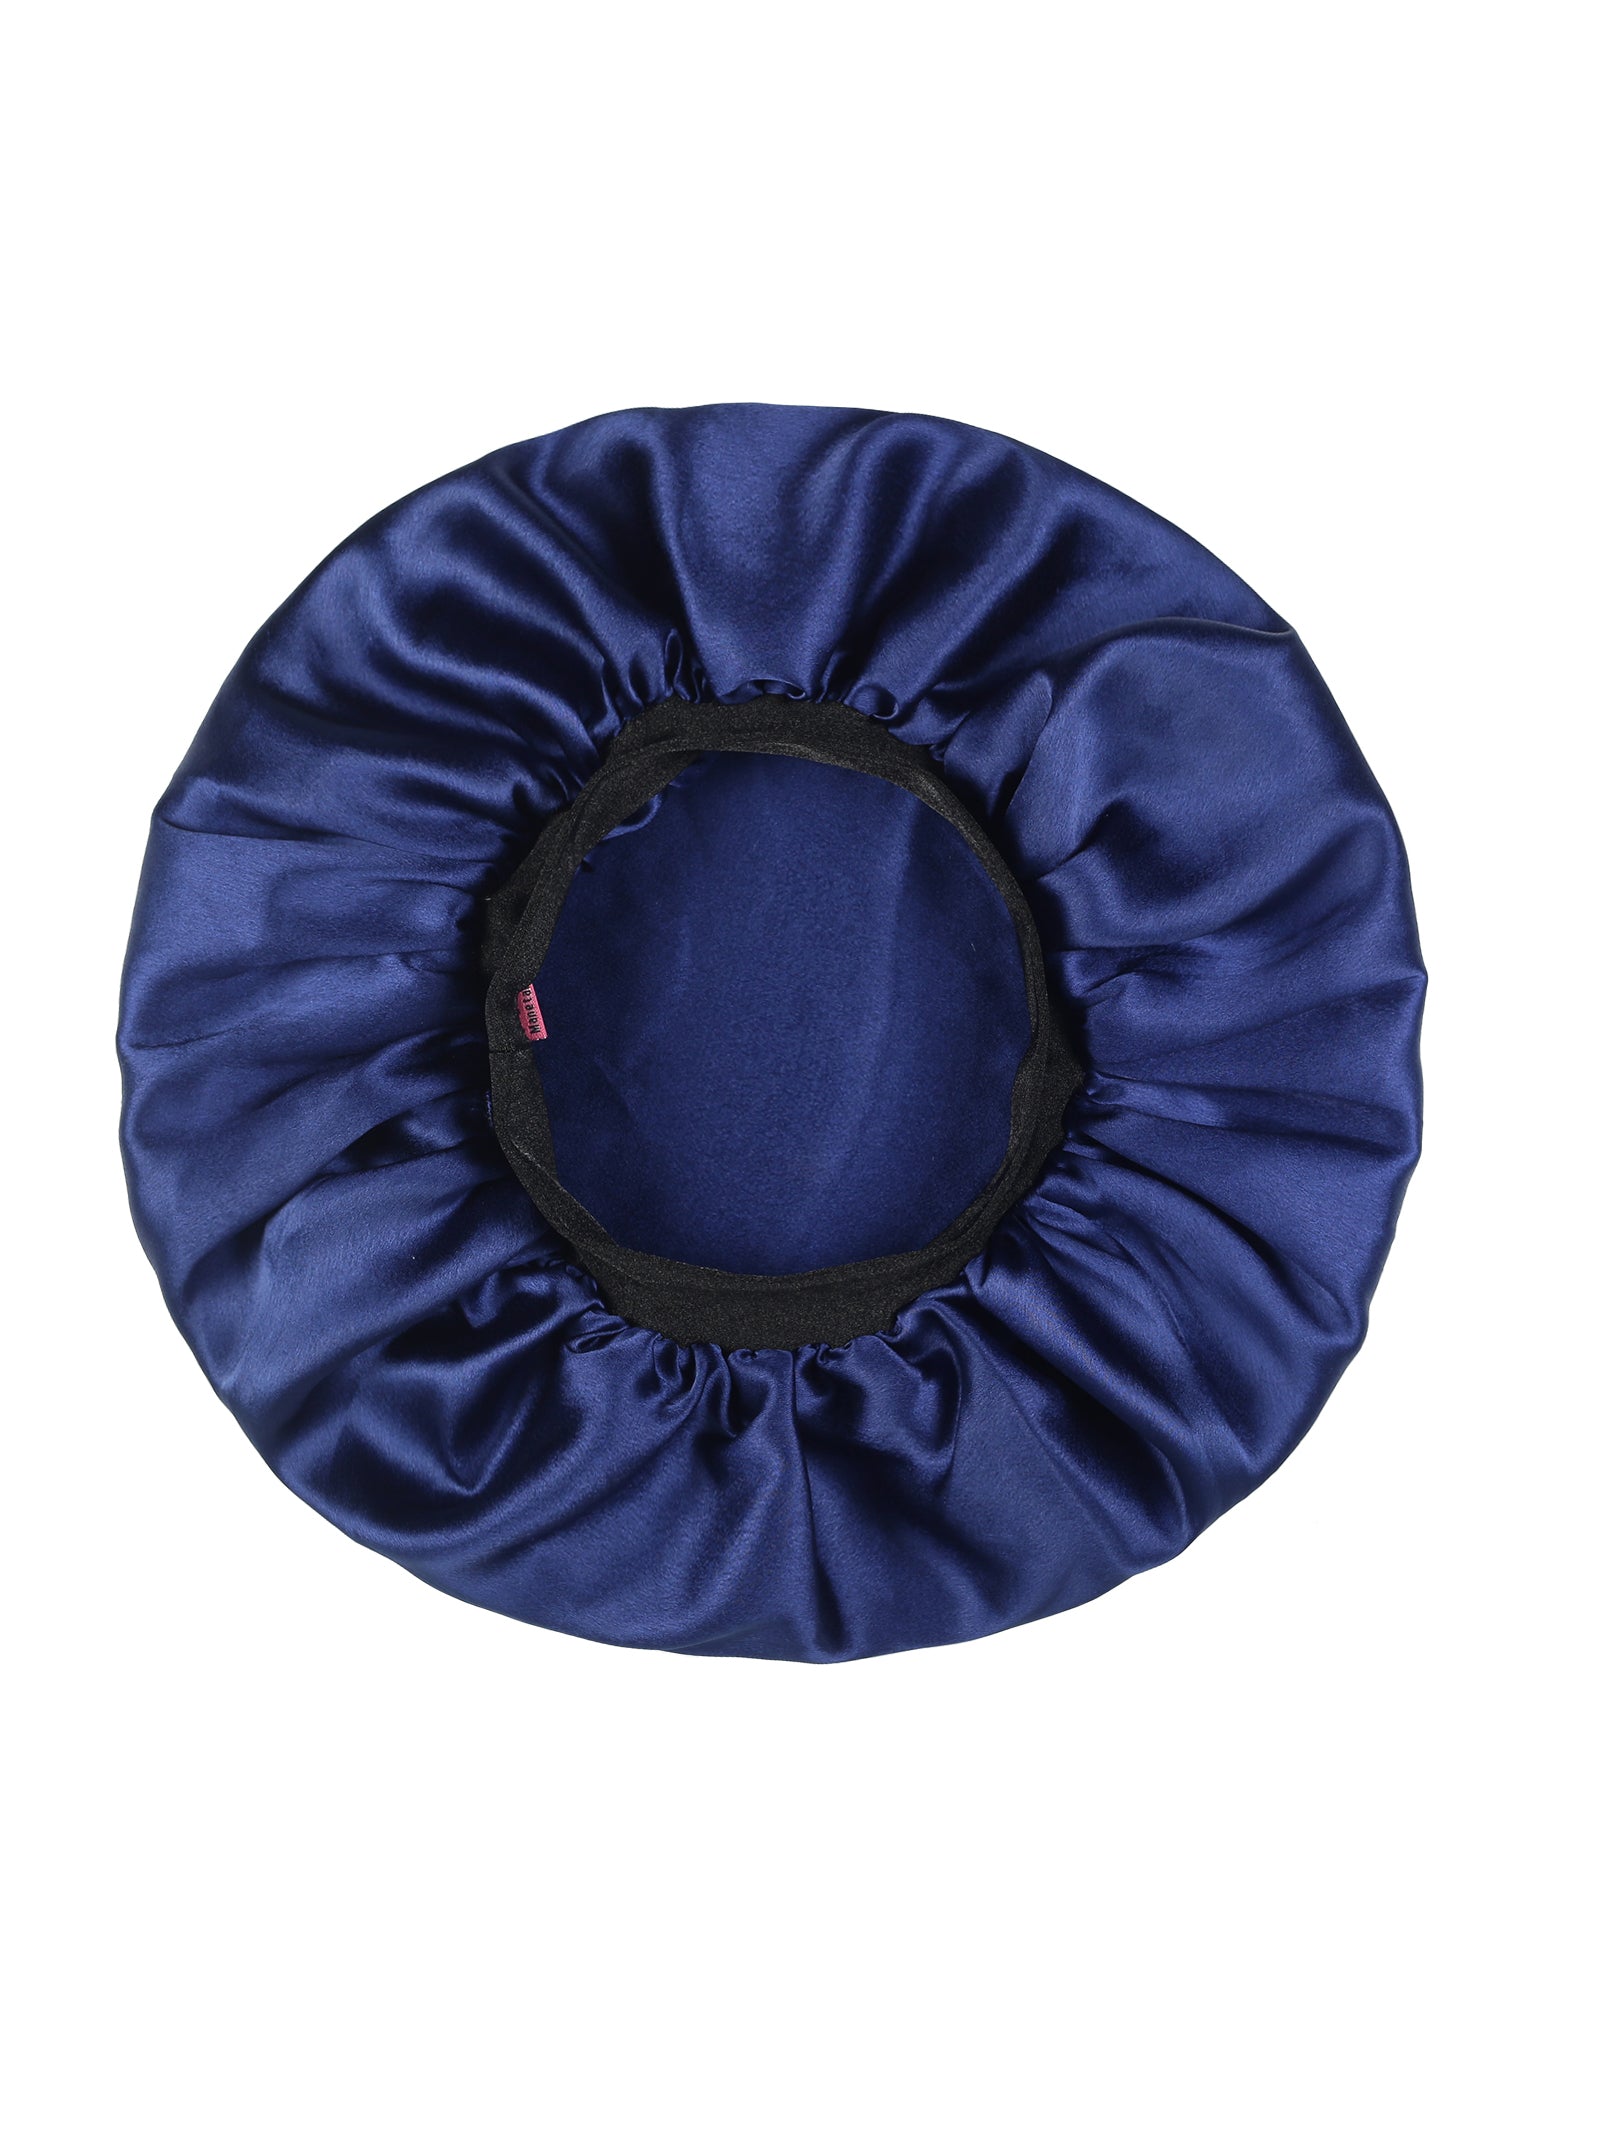 KALSUTANSHI Pure Satin Fully Reversible Hair Bonnet Adjustable Double  Layer Sleep Cap  Price in India Buy KALSUTANSHI Pure Satin Fully  Reversible Hair Bonnet Adjustable Double Layer Sleep Cap Online In India